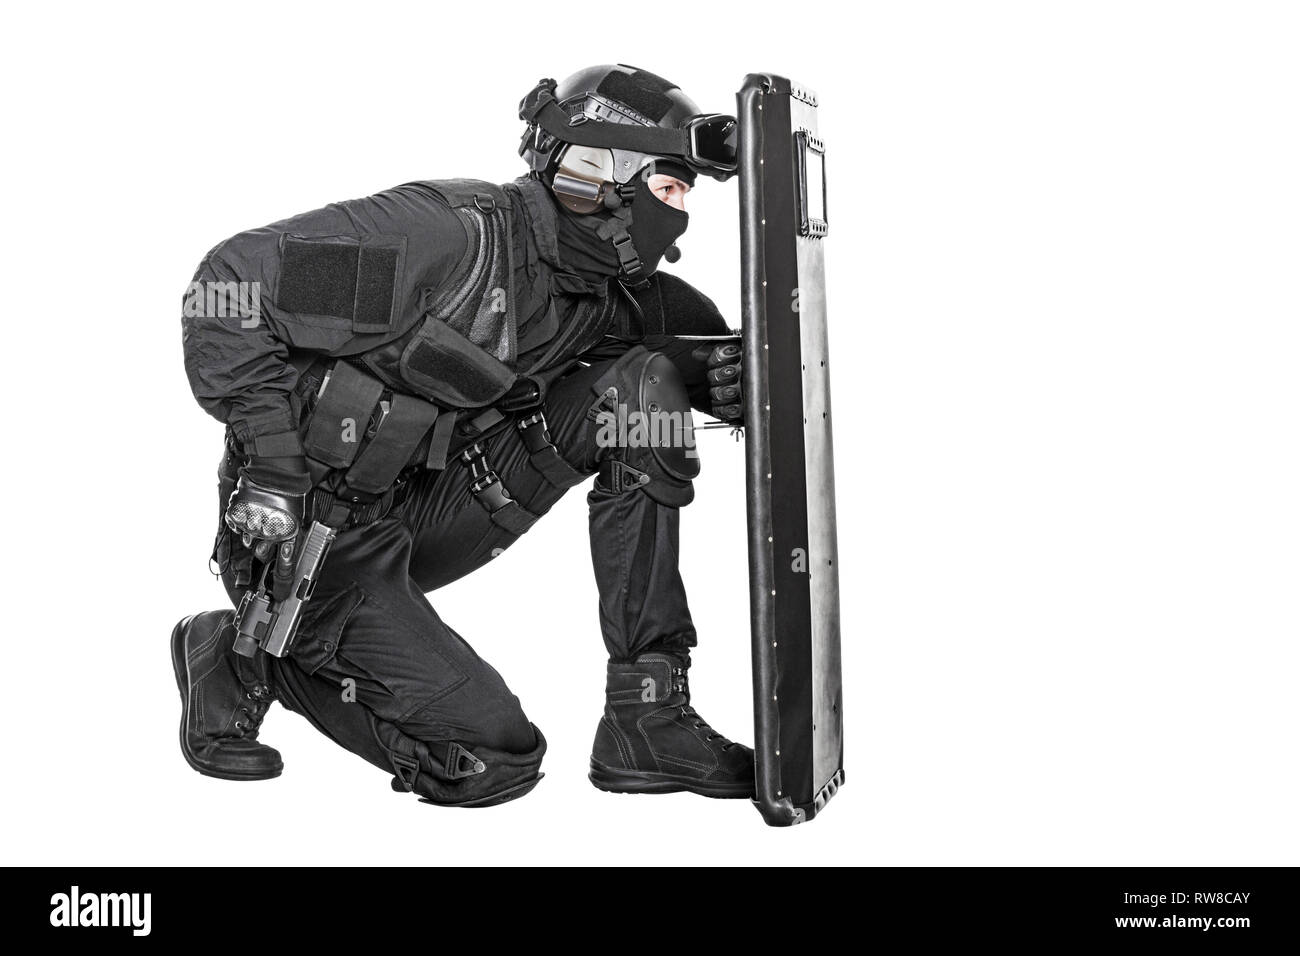 https://c8.alamy.com/comp/RW8CAY/studio-shot-of-swat-police-special-forces-with-pistol-hiding-behind-ballistic-shield-RW8CAY.jpg